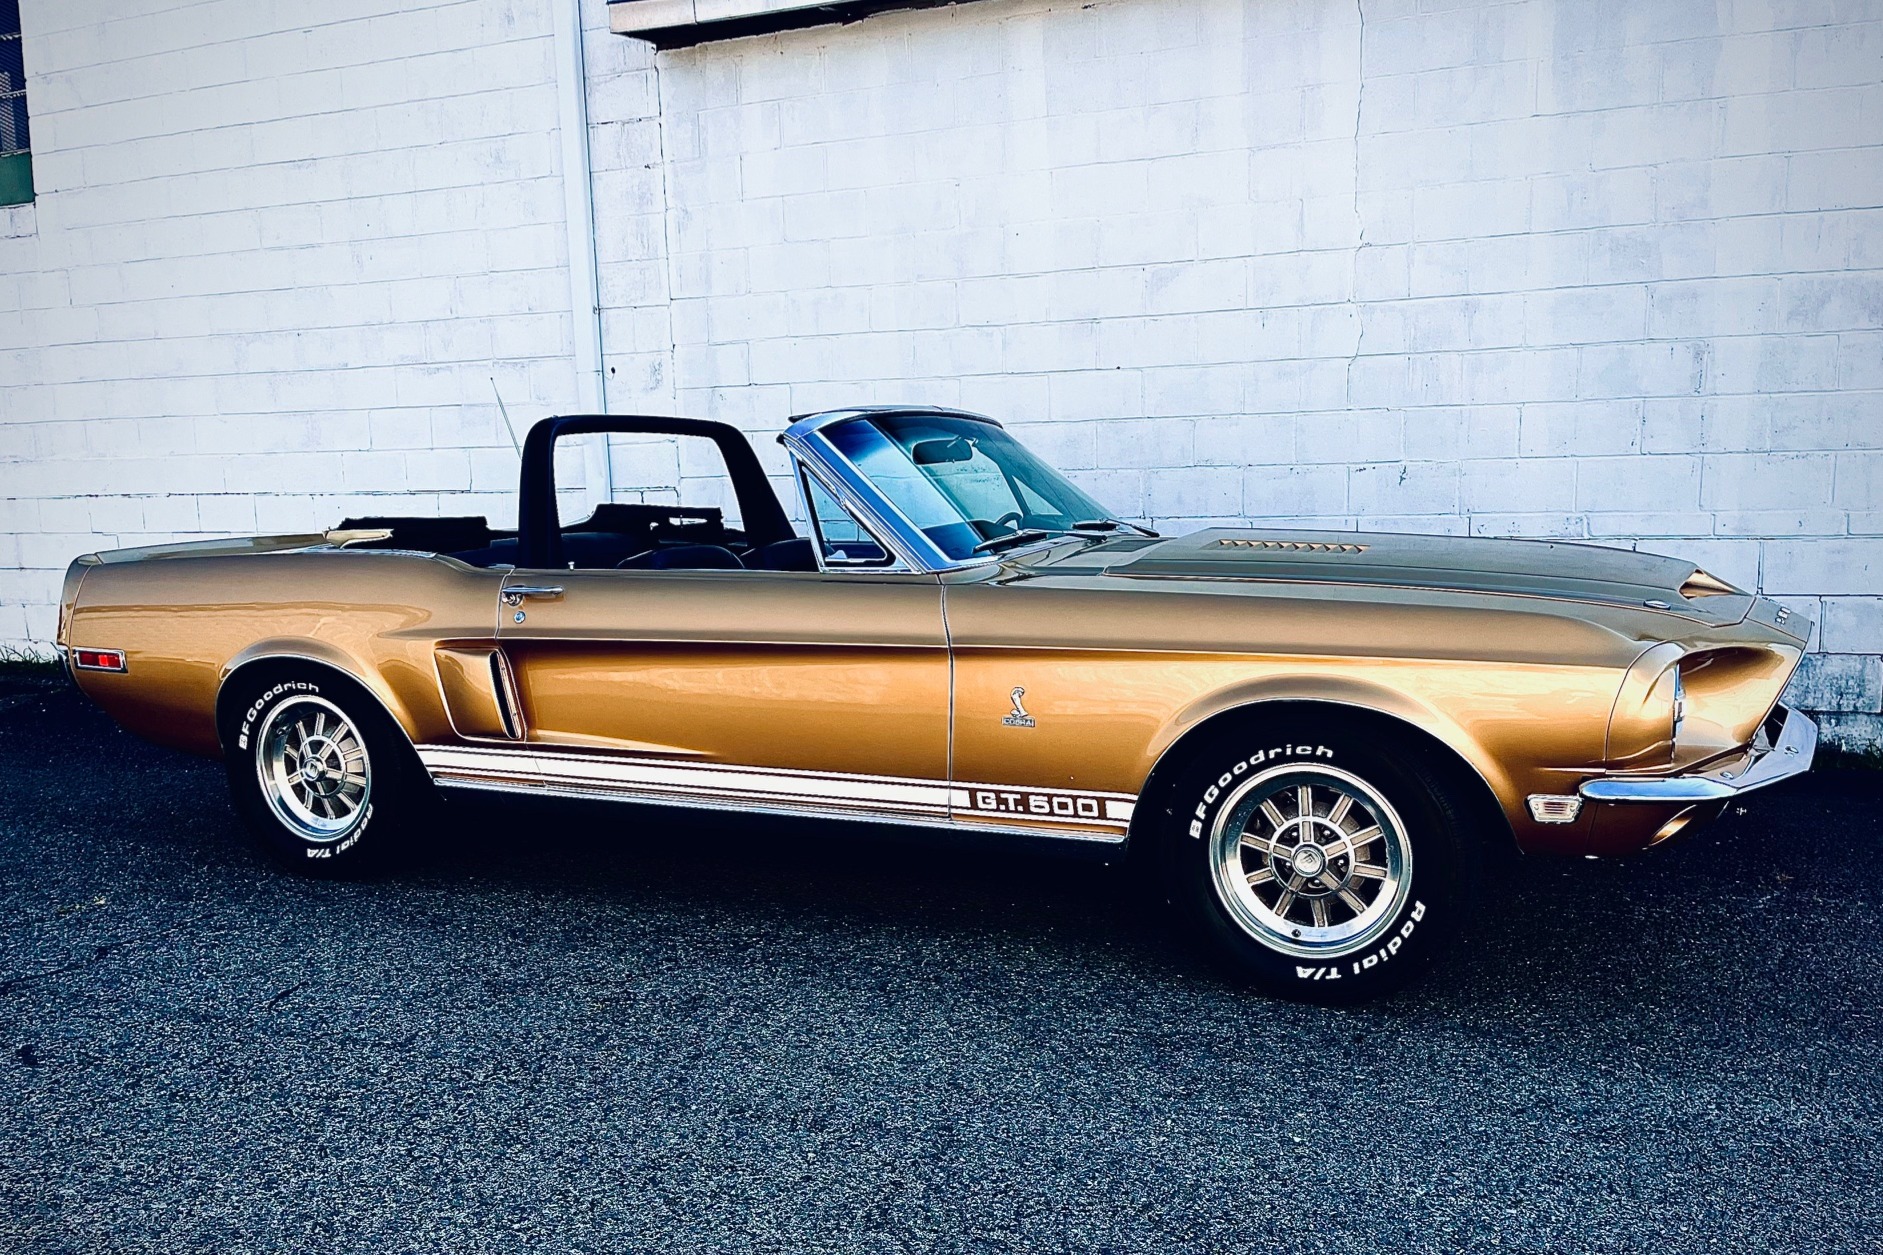 Used 1968 Shelby Mustang GT500 Convertible Review